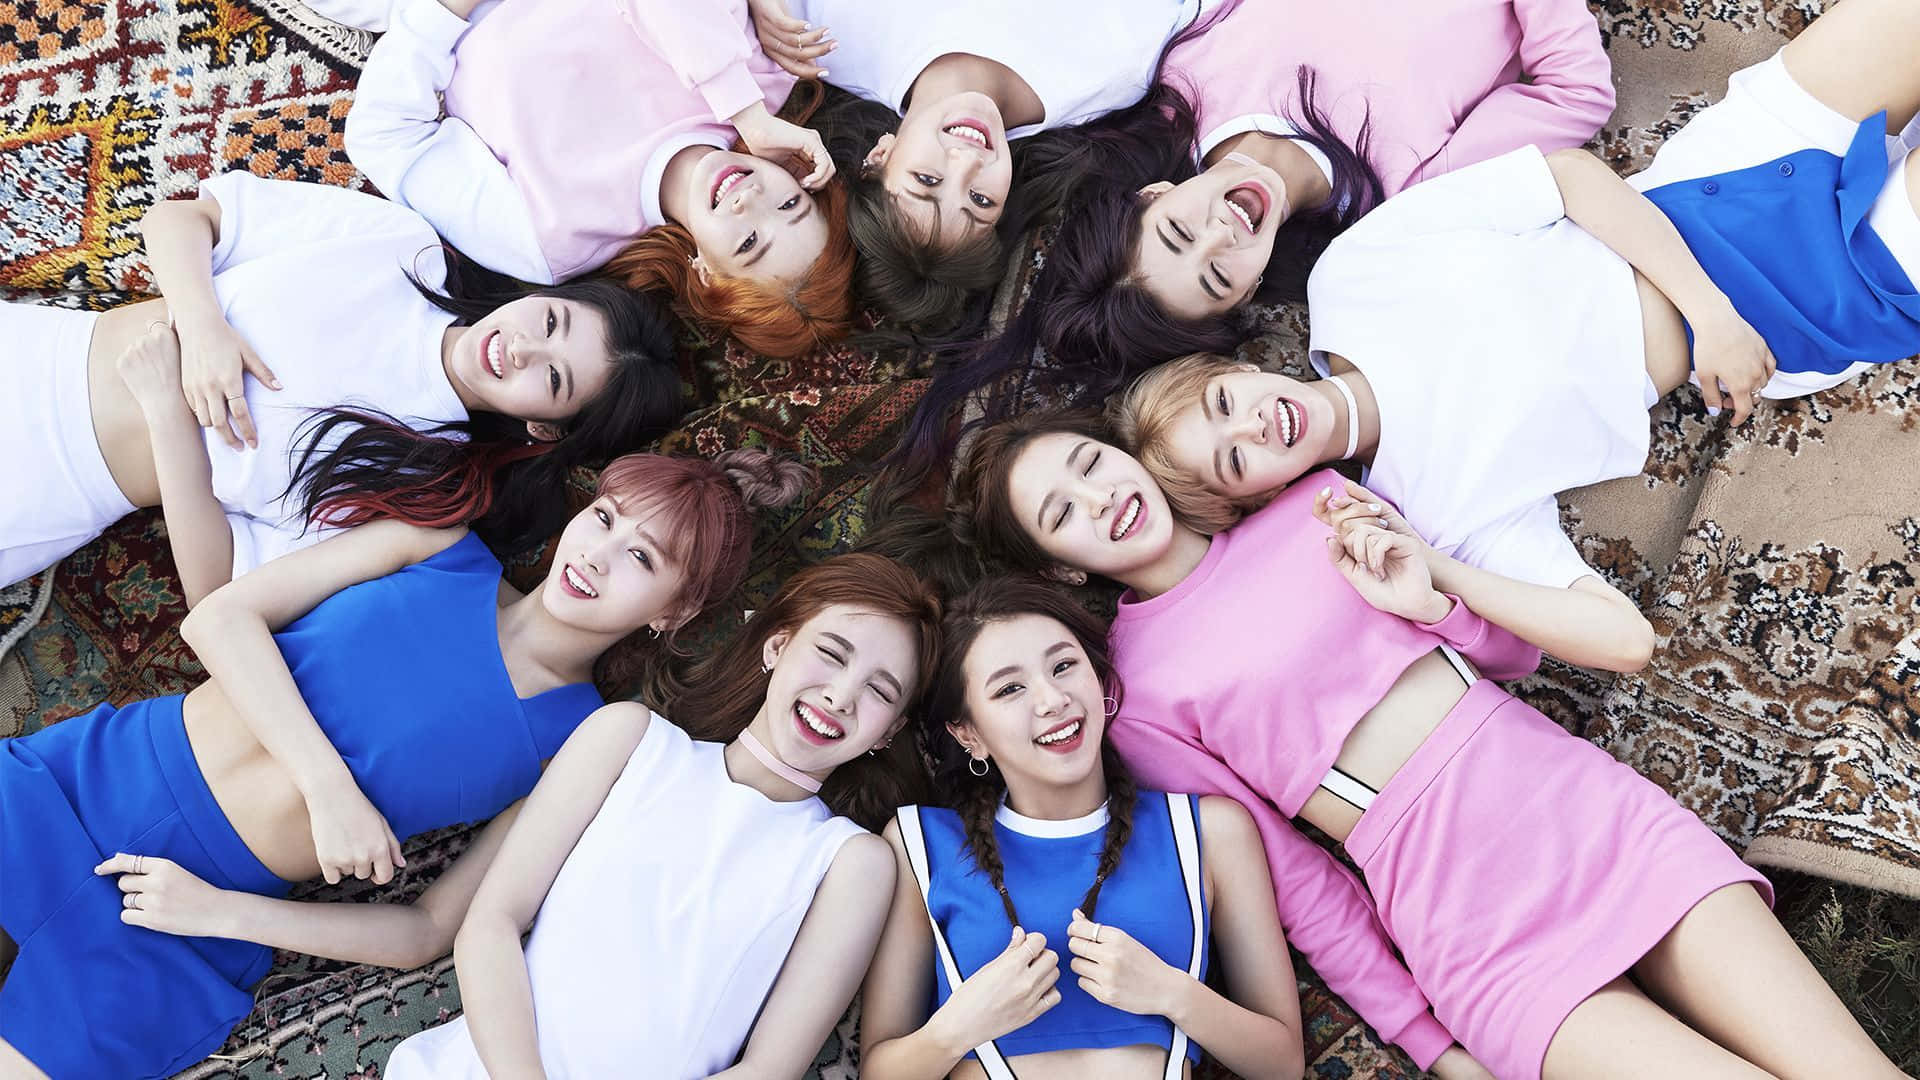 1.  TWICE is ready to dazzle the world with their music.